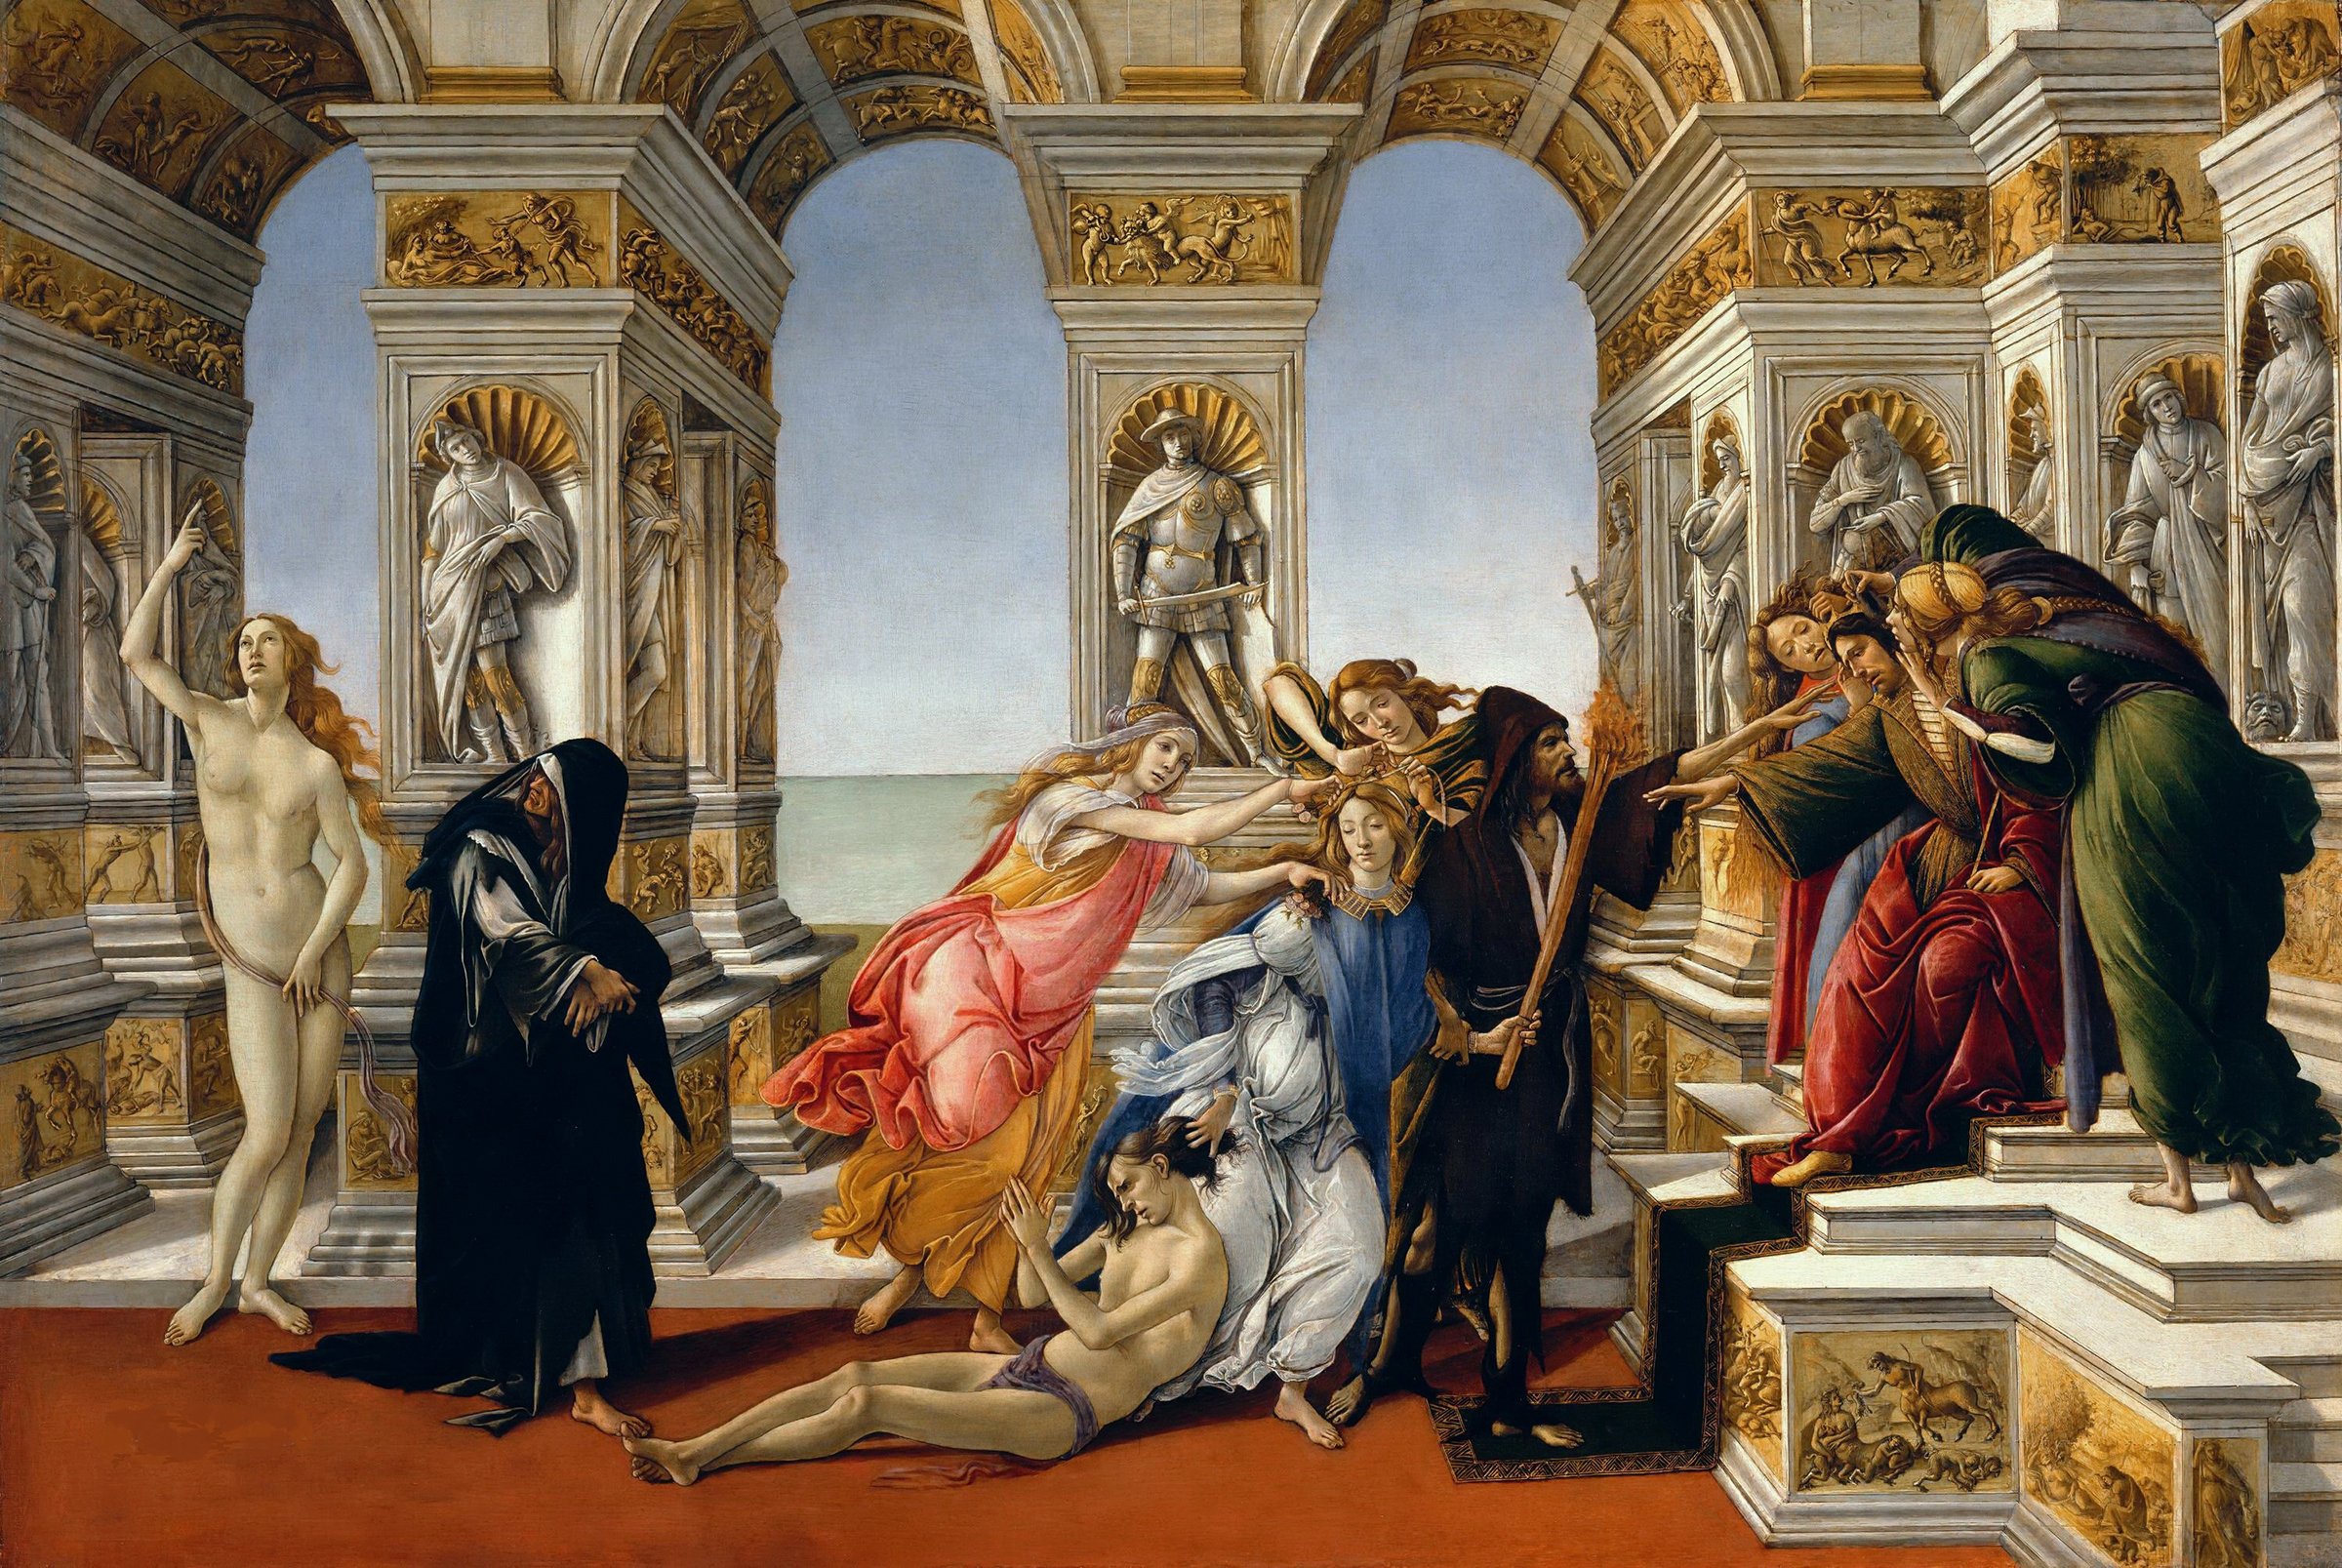 Botticelli's Calumny of Apelles painting, tempera on panel, completed around 1495.